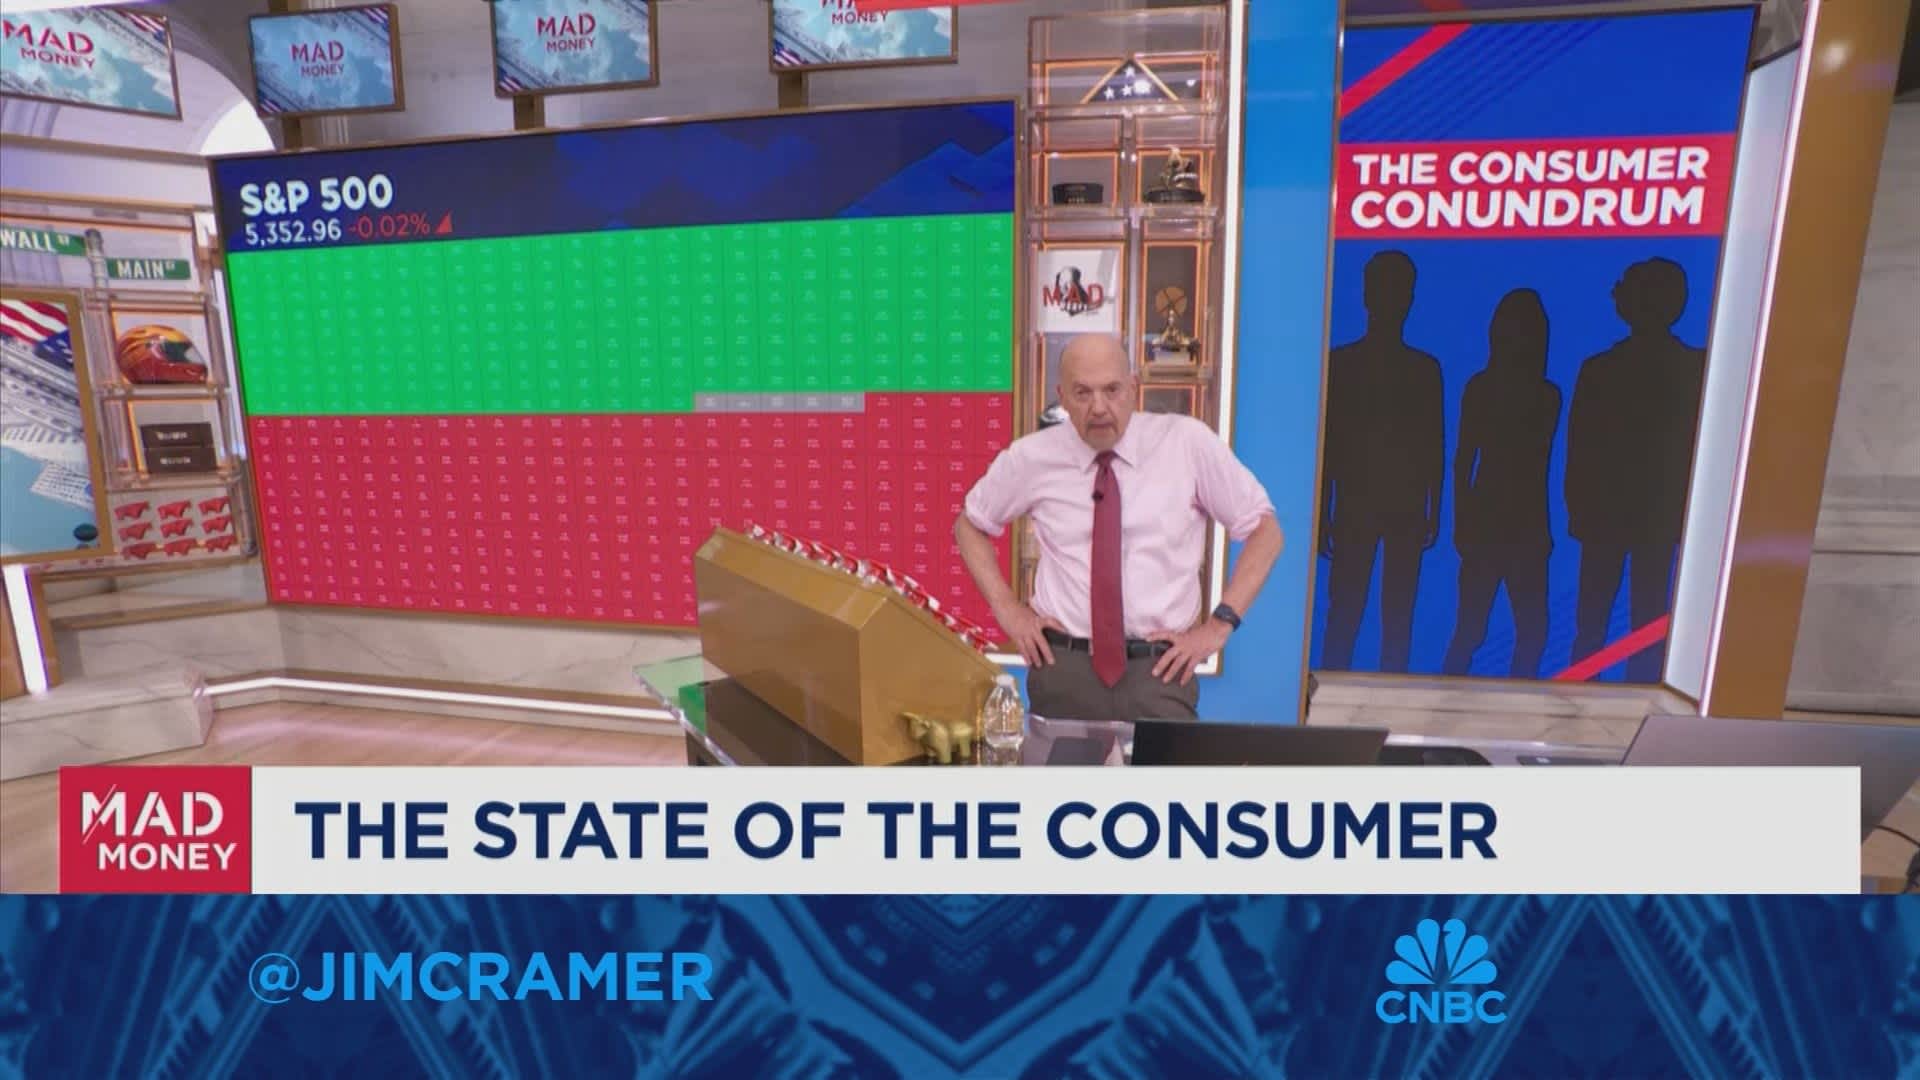 Jim Cramer takes a closer look at the state of the consumer